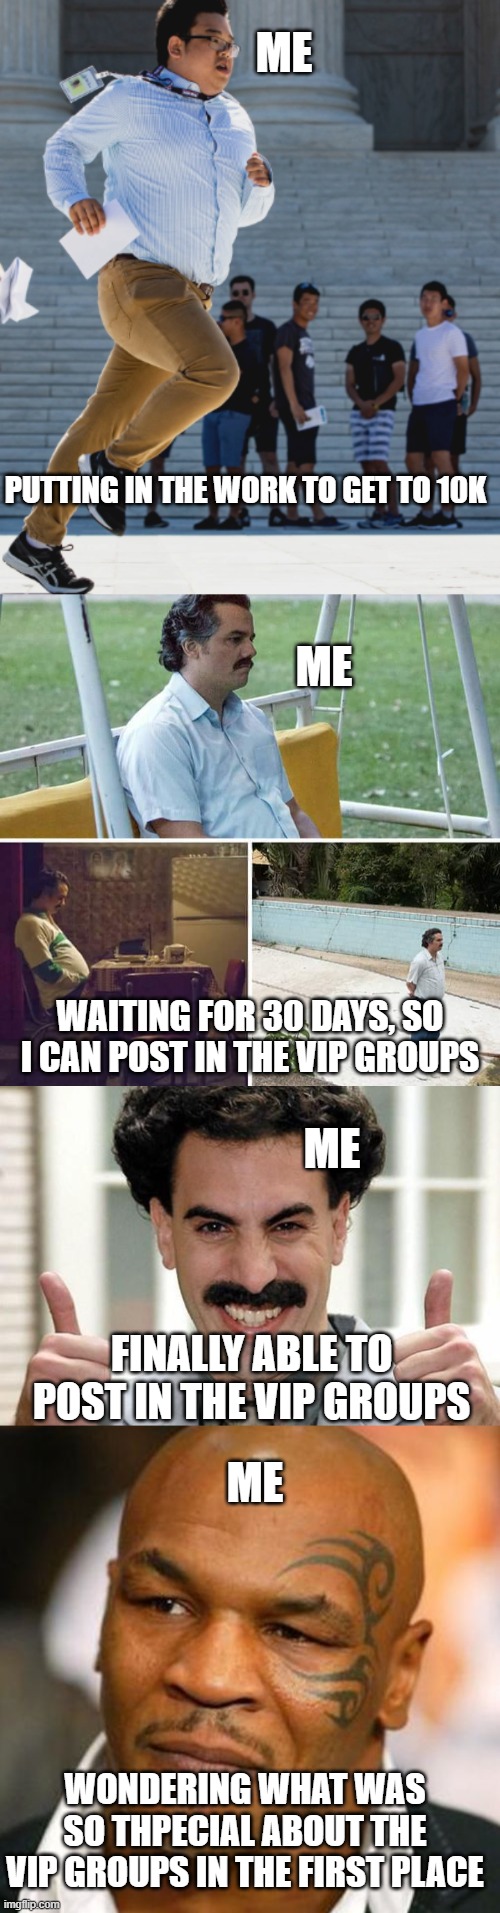 Noob athpirations | ME; PUTTING IN THE WORK TO GET TO 10K; ME; WAITING FOR 30 DAYS, SO I CAN POST IN THE VIP GROUPS; ME; FINALLY ABLE TO POST IN THE VIP GROUPS; ME; WONDERING WHAT WAS SO THPECIAL ABOUT THE VIP GROUPS IN THE FIRST PLACE | image tagged in gotta jet,memes,sad pablo escobar,great success,disappointed tyson | made w/ Imgflip meme maker